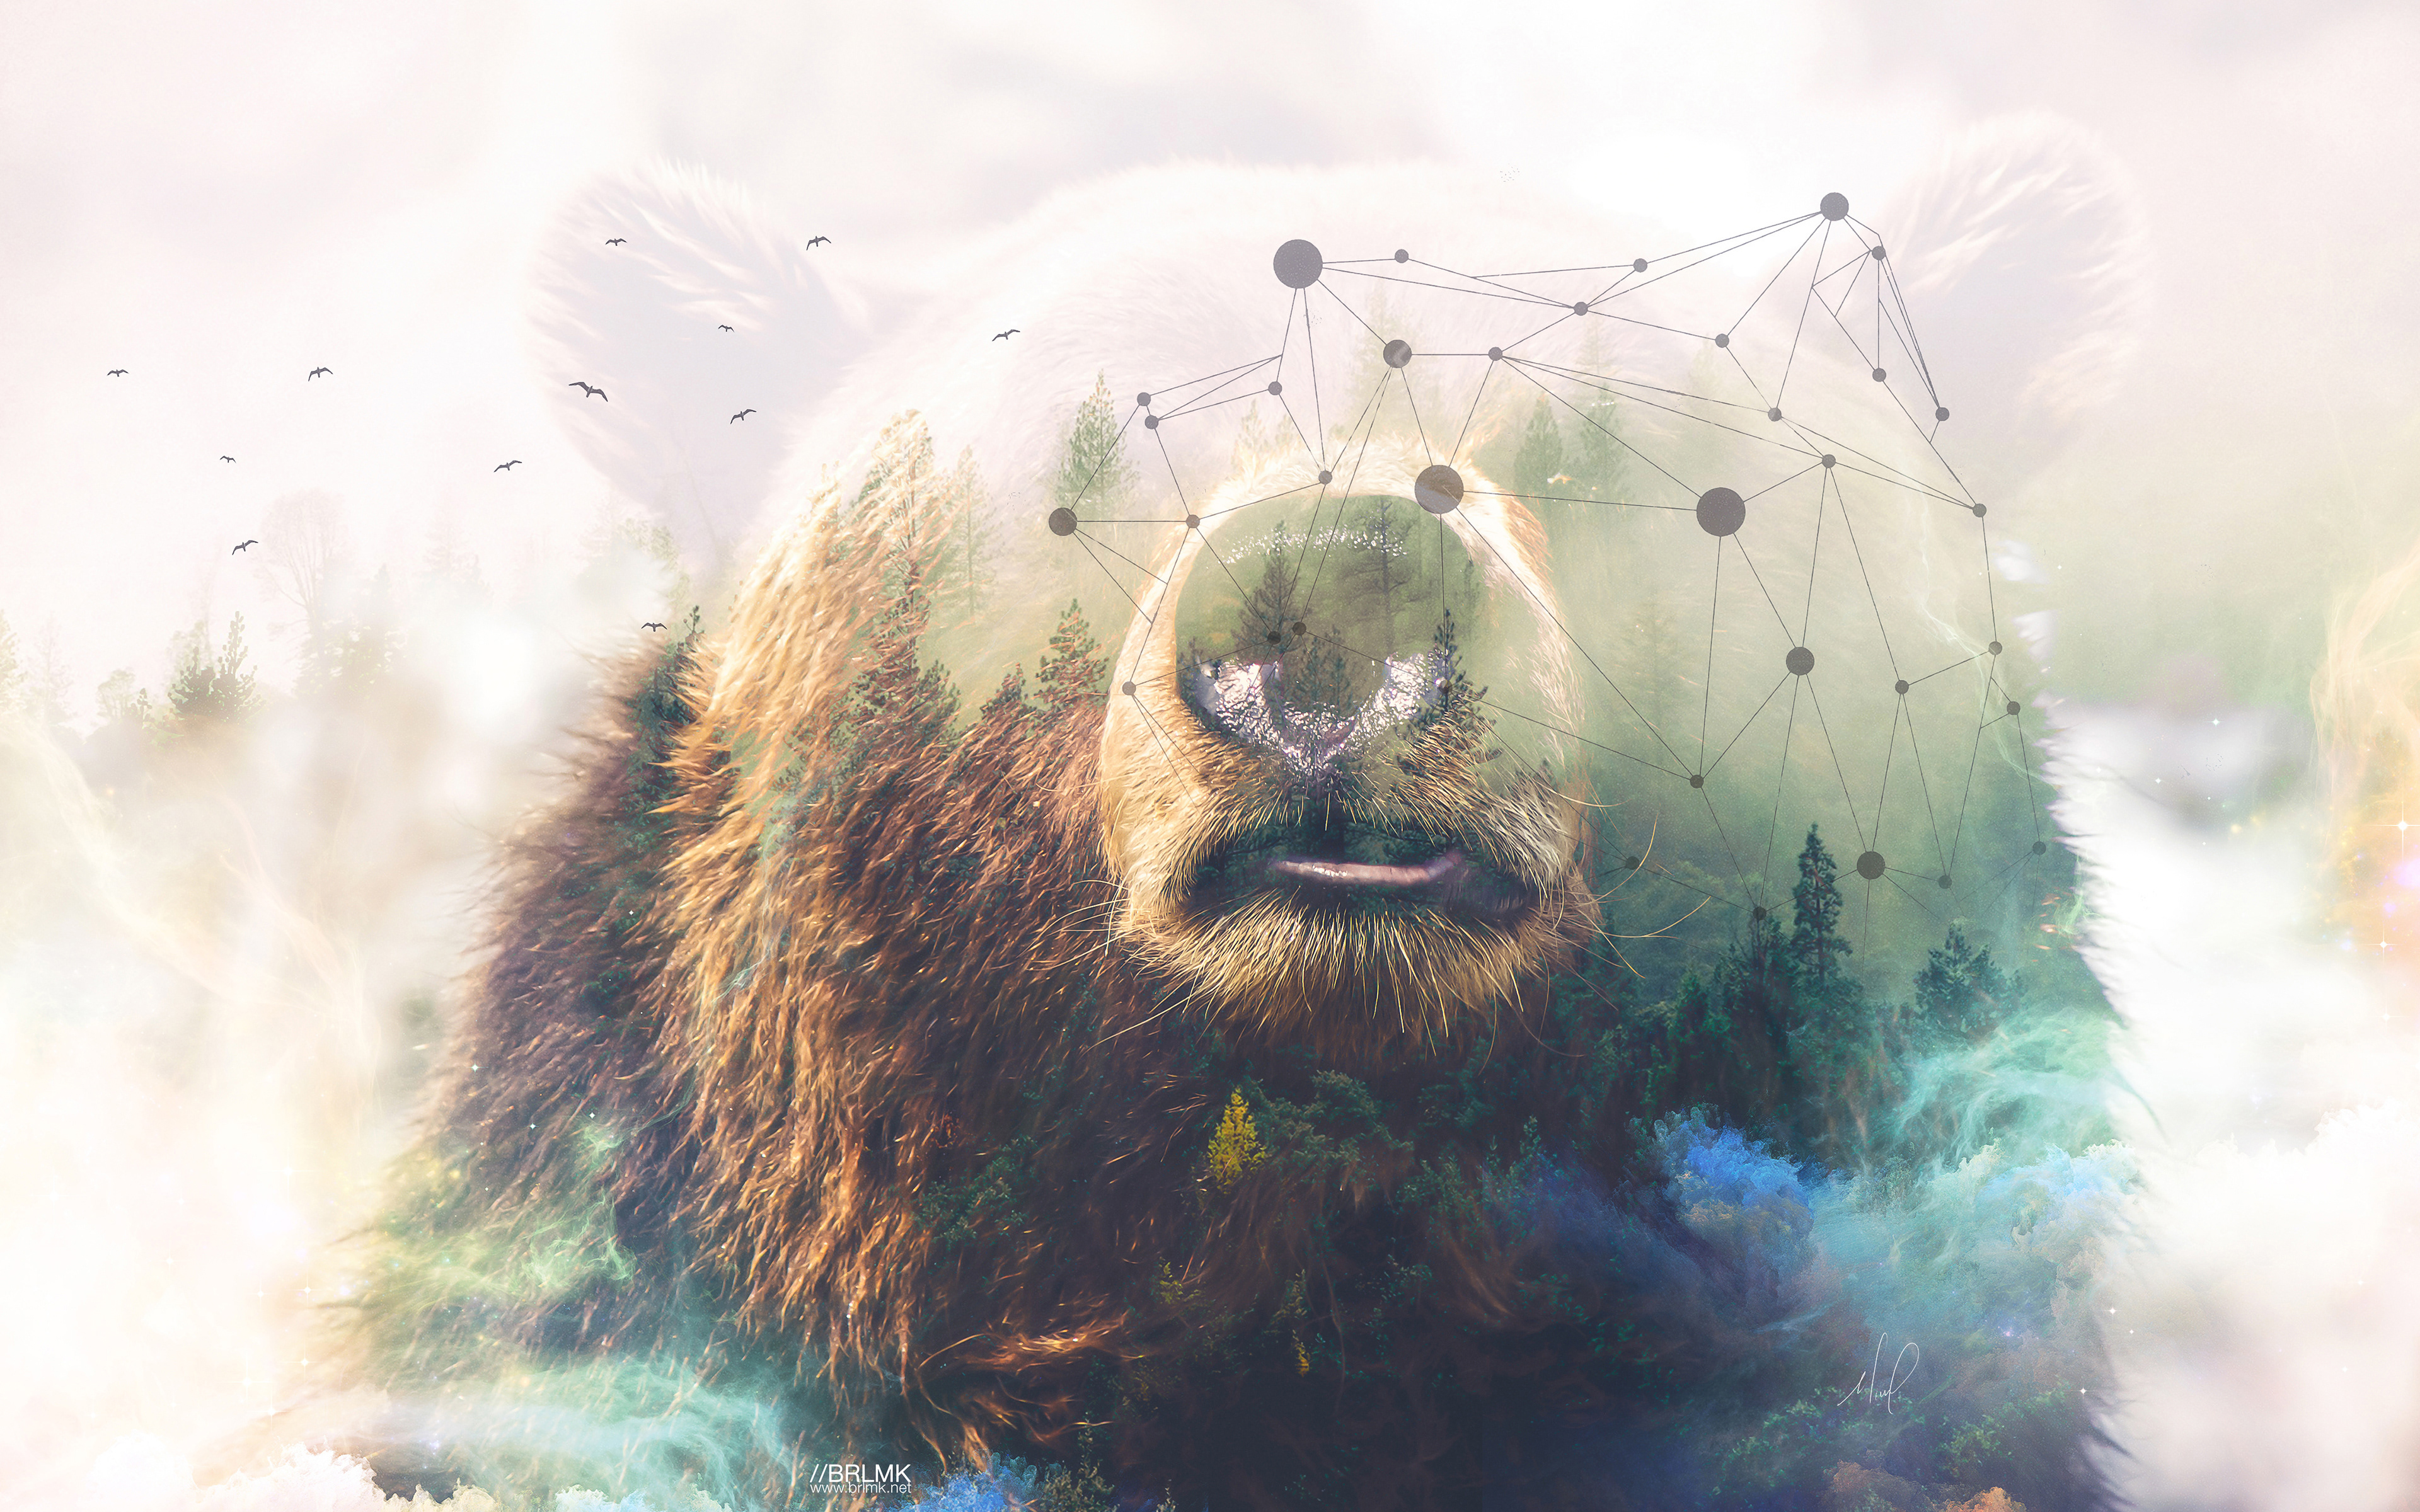 Grizzly bear Forest Double Exposure 4K5071518985 - Grizzly bear Forest Double Exposure 4K - Maller, Grizzly, Forest, Exposure, Double, Bear